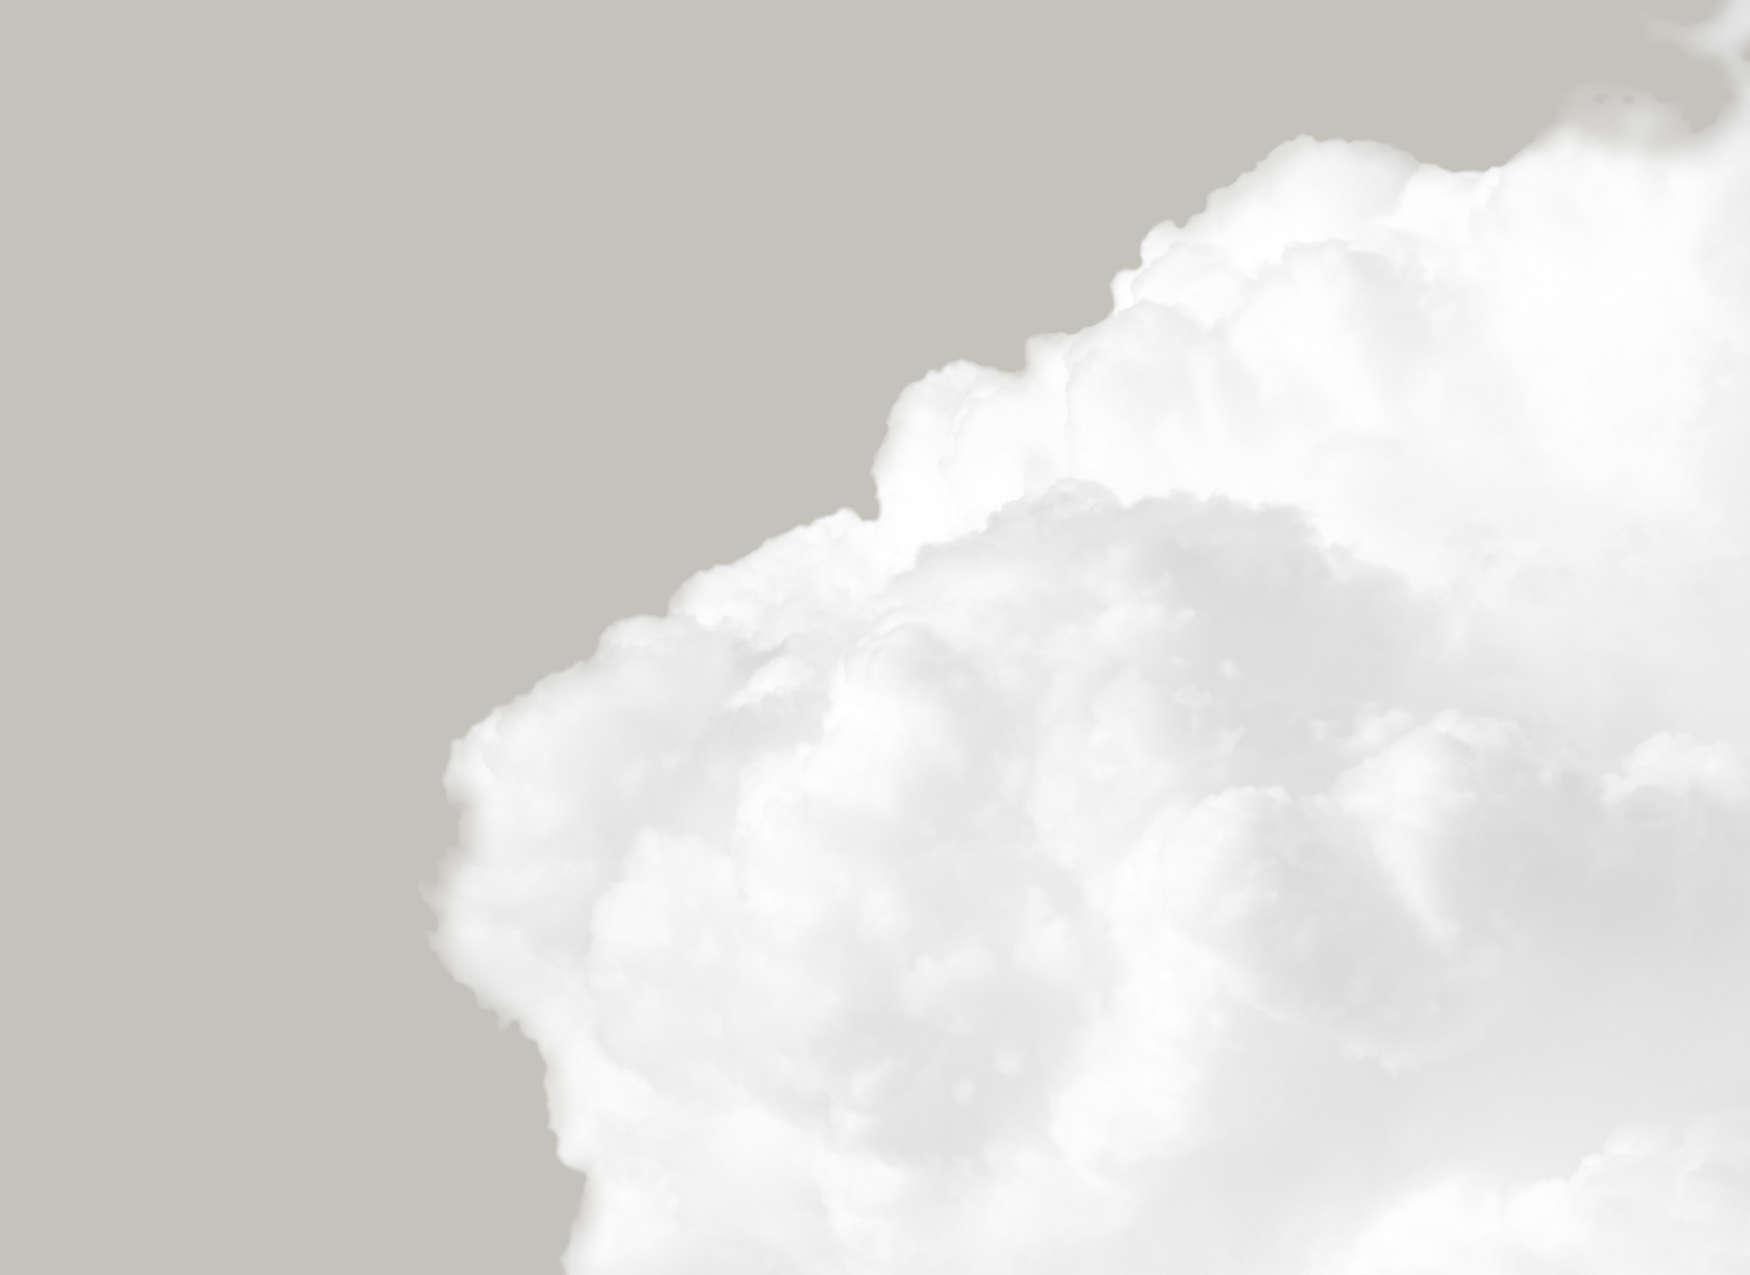             Photo wallpaper with white clouds in a grey sky - Grey, White
        